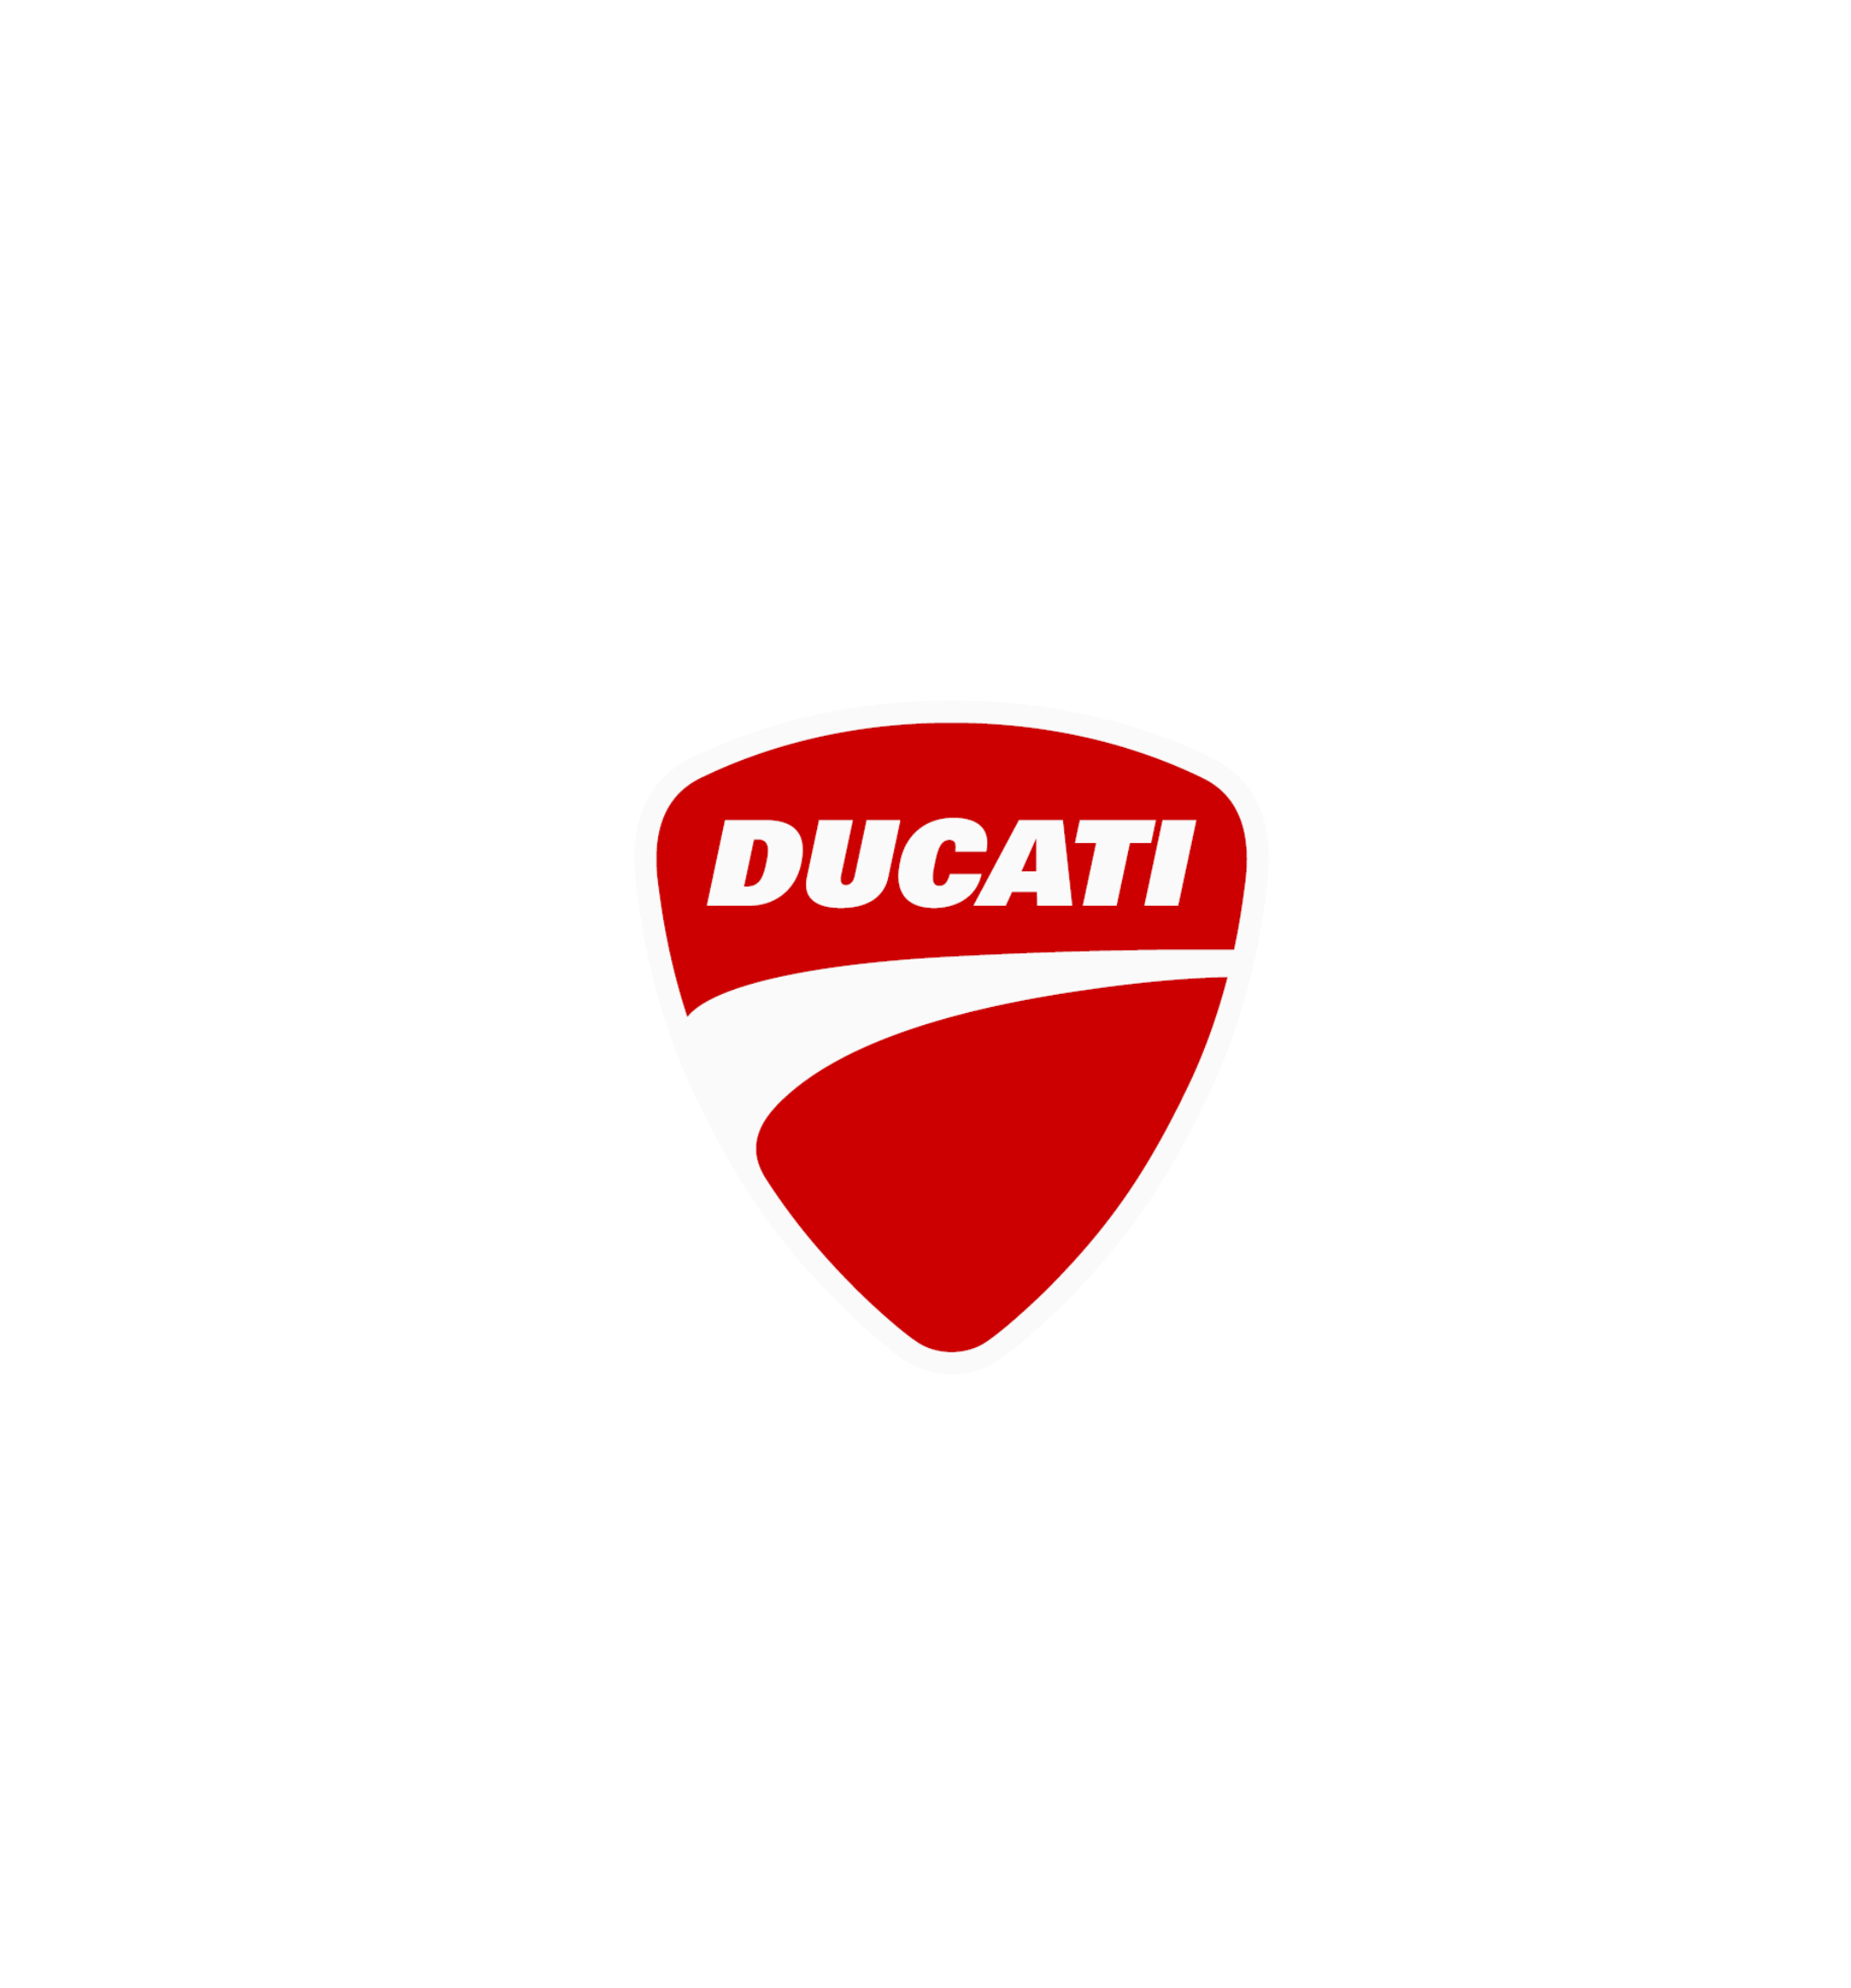 Ducati Motor Holding S.p.a   Pioneers - Ducati, Transparent background PNG HD thumbnail